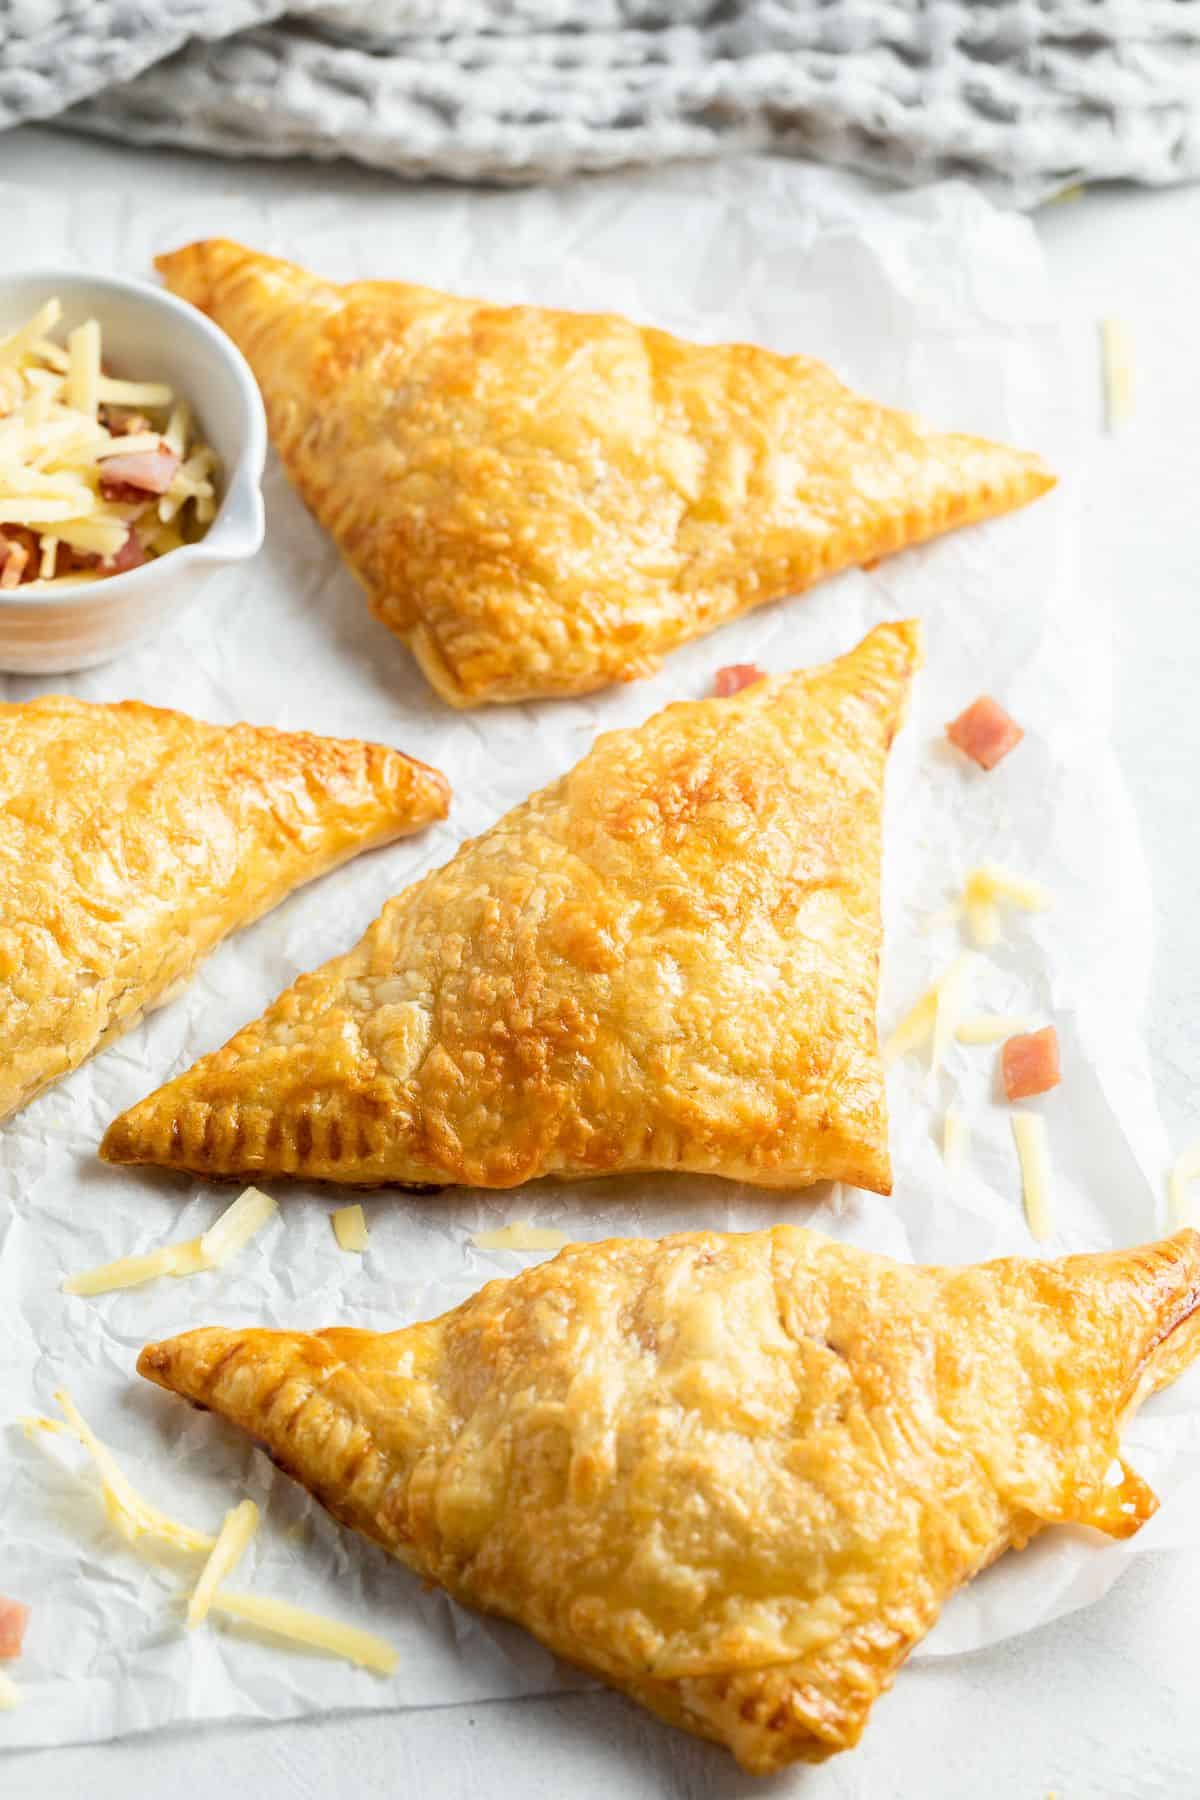 Four cooked bacon turnovers sitting on some baking paper with cheese sprinkled around the edge.